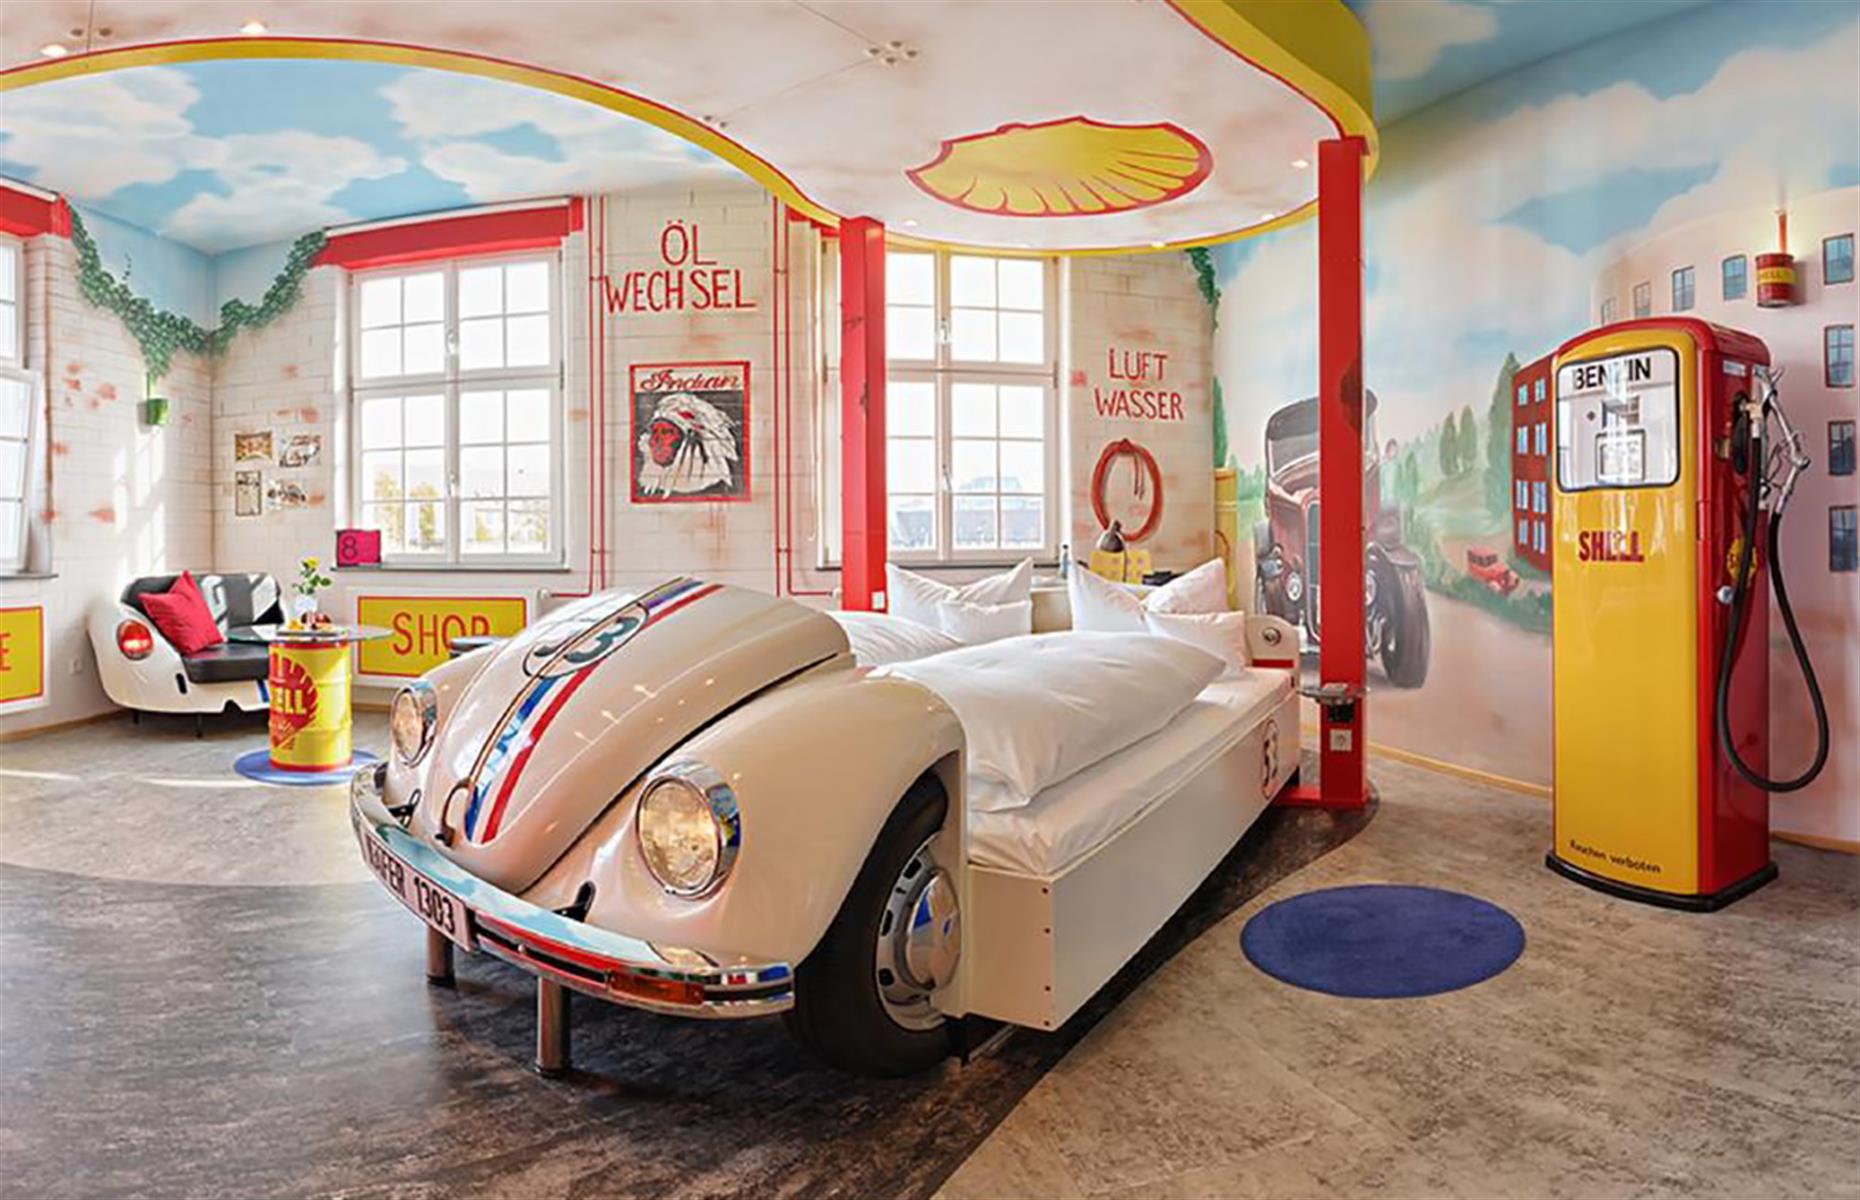 <p>A petrolhead's dream, the <a href="https://www.booking.com/hotel/de/v8-hotel-motorworld-region-stuttgart.en-gb.html" rel="nofollow” target=">V8 HOTEL</a> just outside of Stuttgart is an ode to the motoring industry. Named after the revolutionary eight-cylinder engine, the hotel's rooms are individually designed with plenty of car industry-related memorabilia and even car-shaped beds. Both the Mercedes-Benz and Porsche Museums are in striking distance and tours can be arranged in the nearby Mercedes-Benz Sindelfingen factory too.</p>